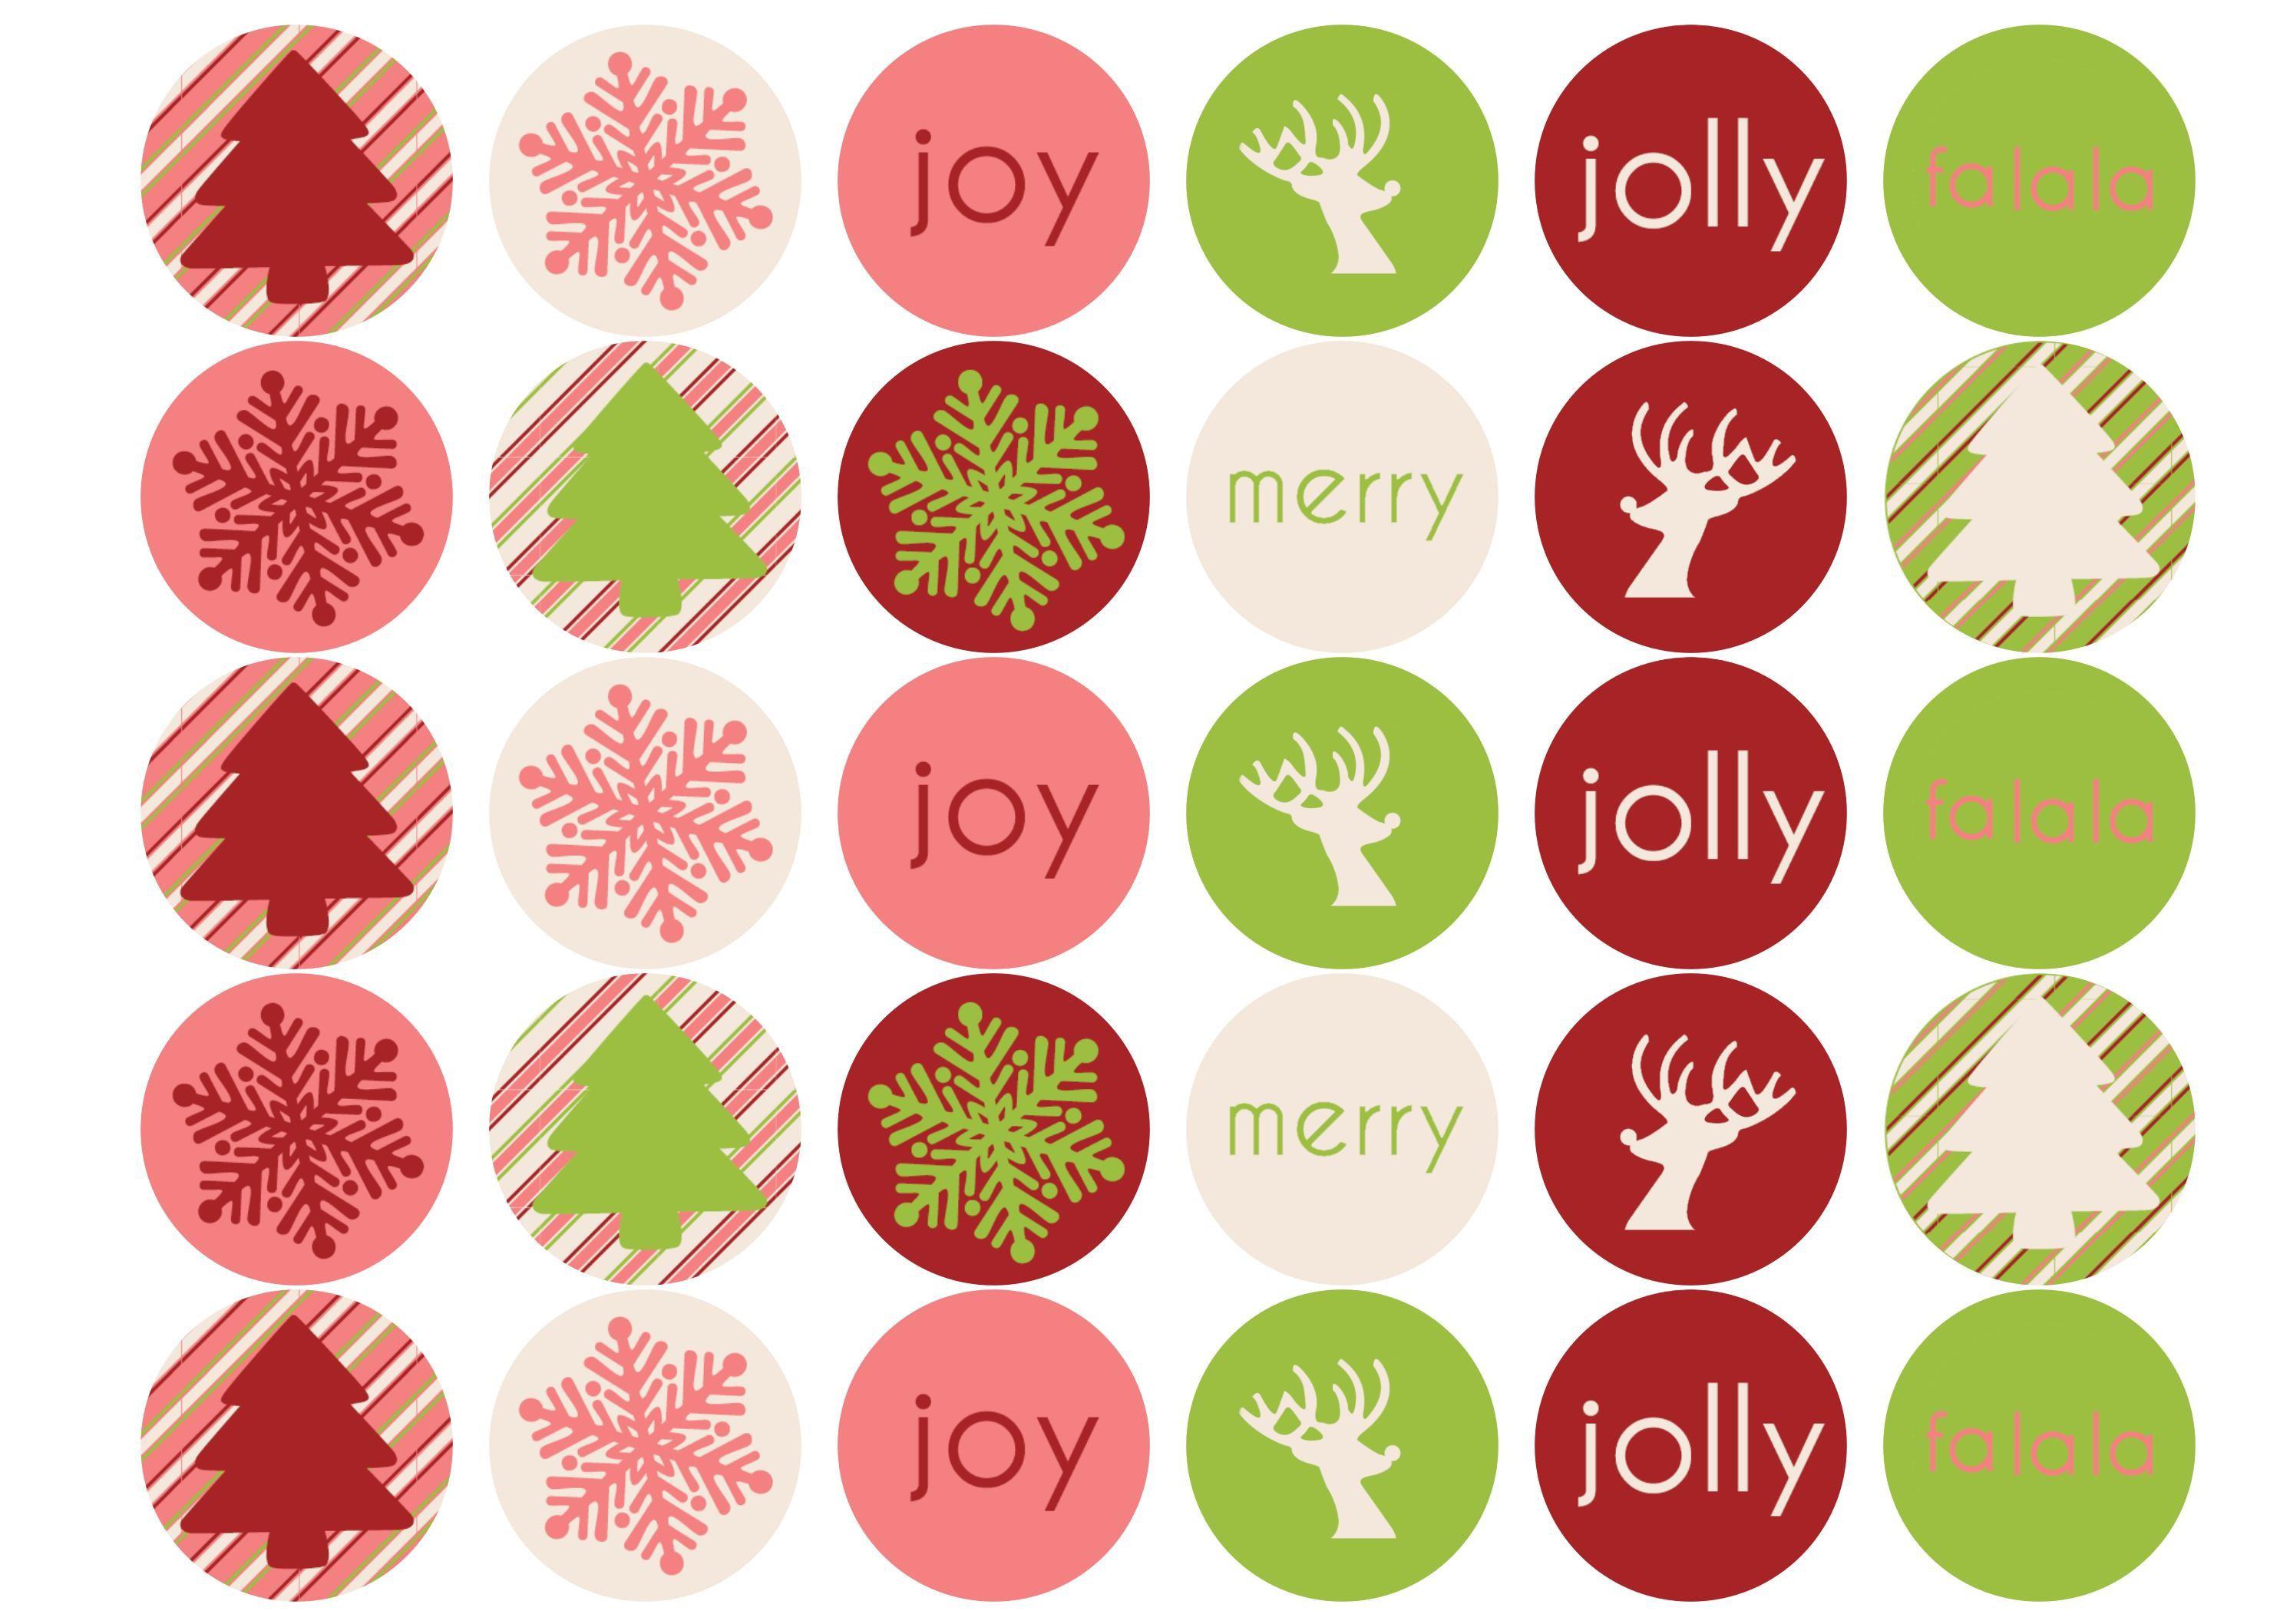 Printed Christmas cake toppers and cupcake toppers printed onto rice paper or icing